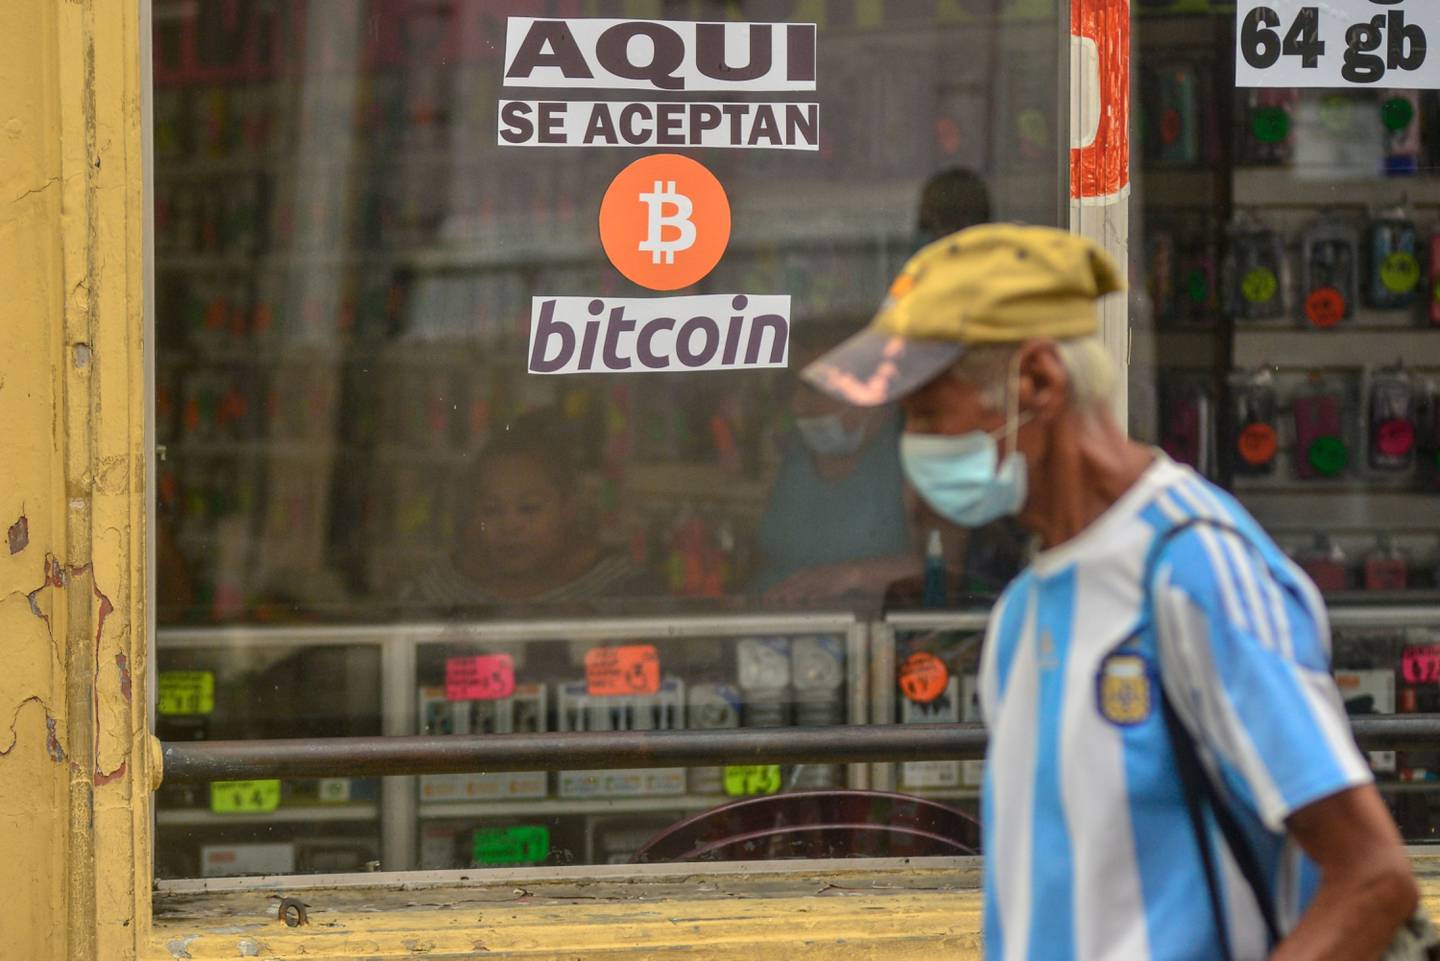 More than two-thirds of the crypto withdrawals happened in Latin America.